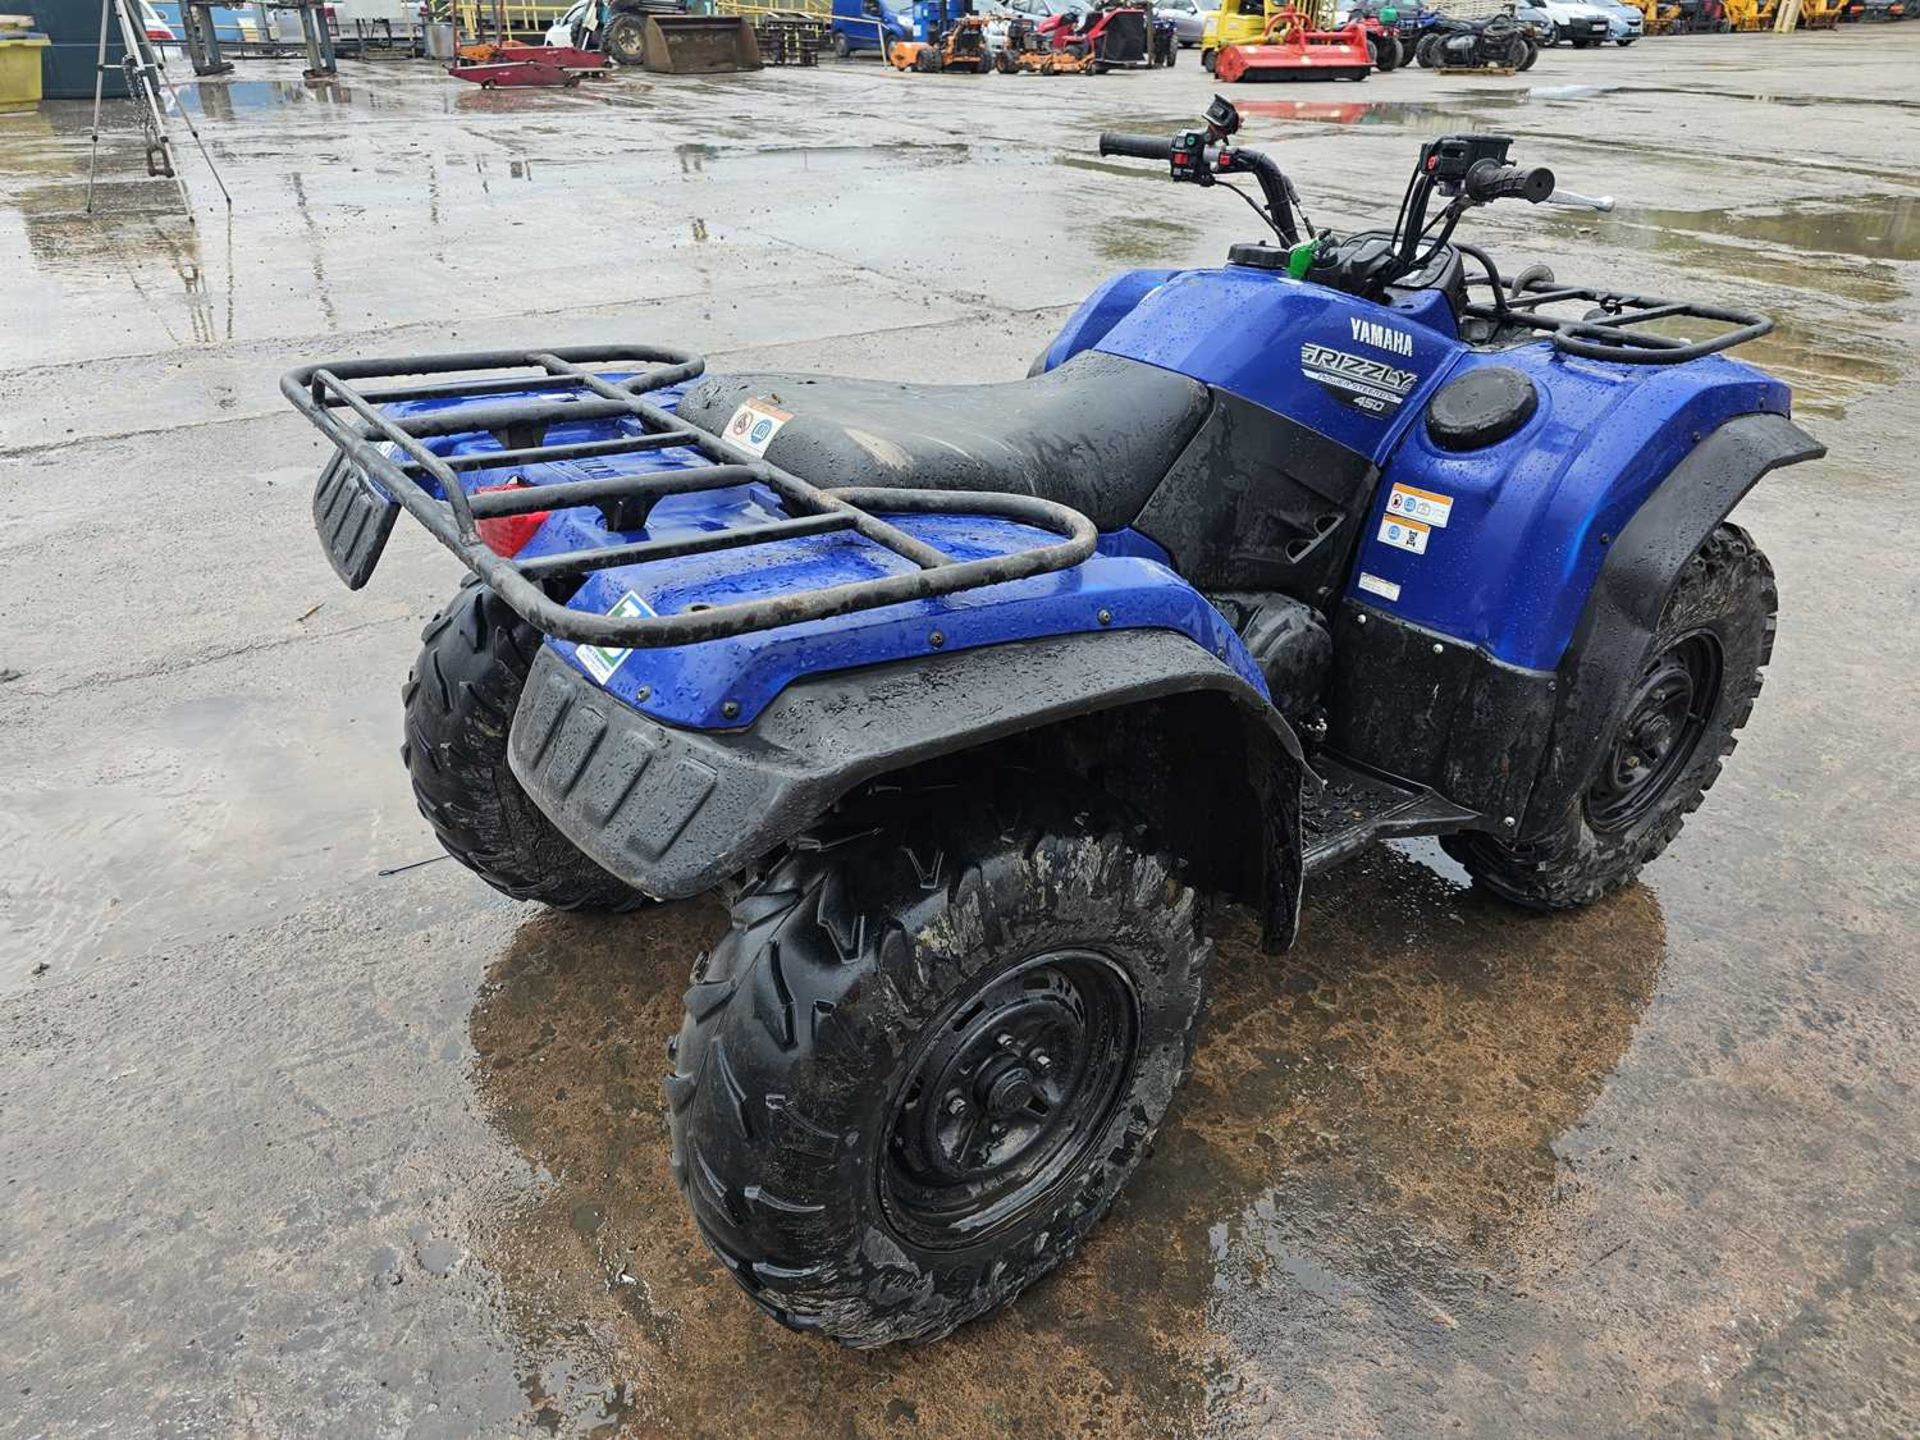 2016 Yamaha Grizzly 450cc 4WD Petrol Quad Bike, Winch, Power Steering - Image 5 of 19